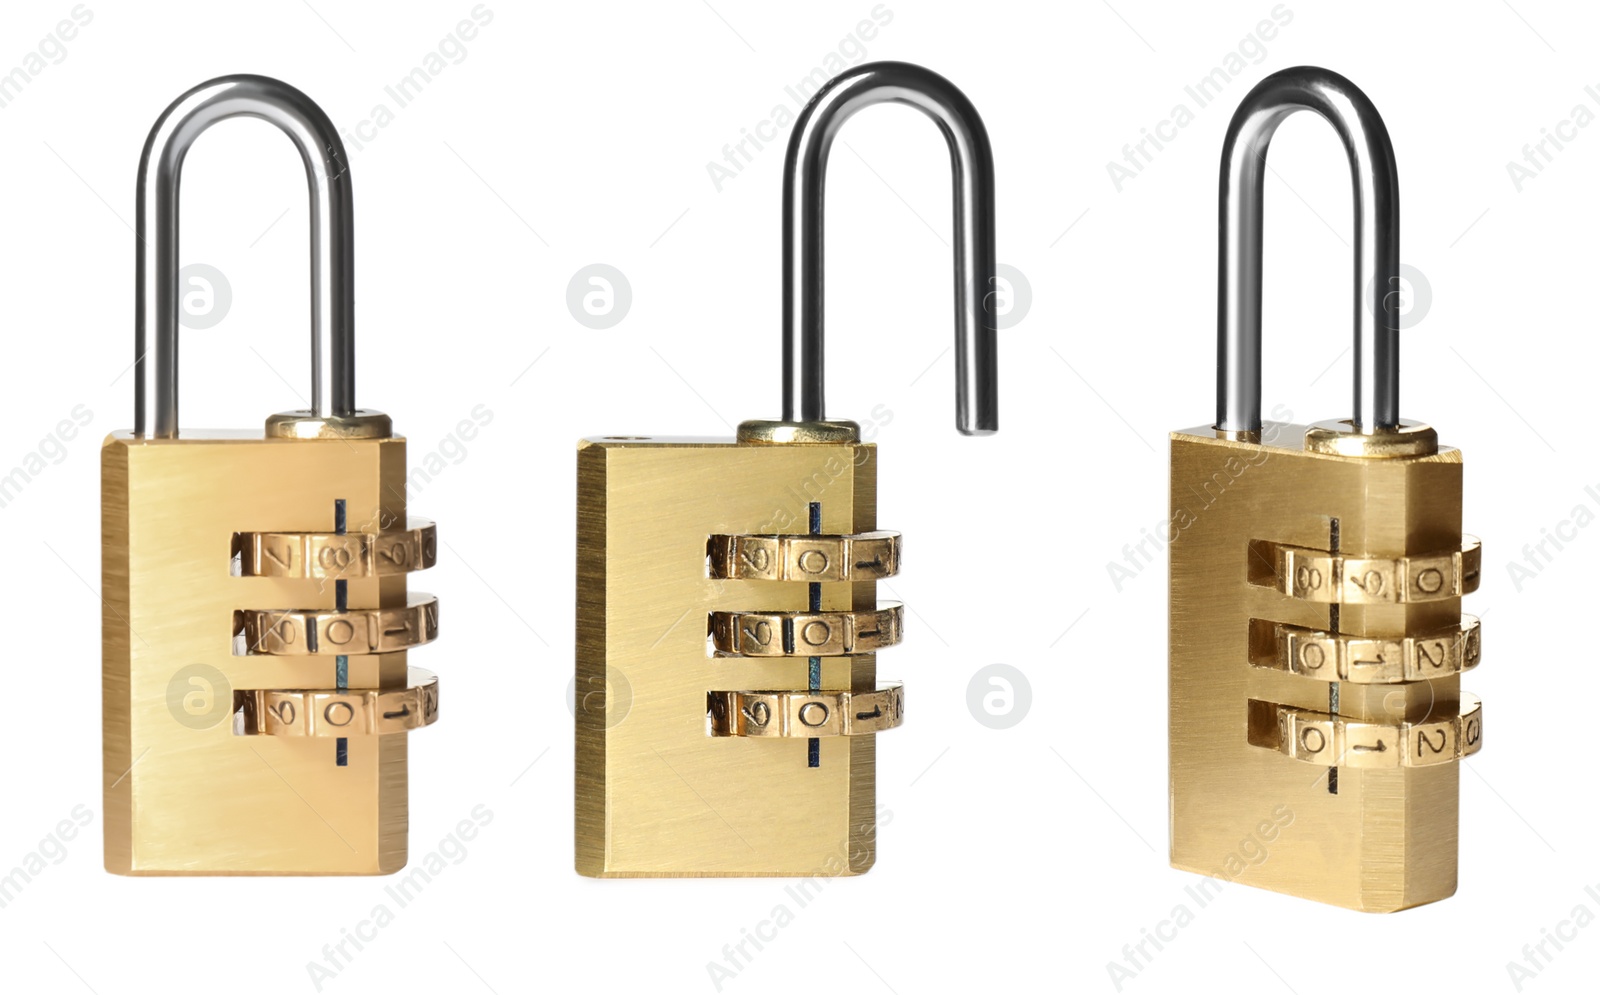 Image of Metal combination padlocks on white background, collage